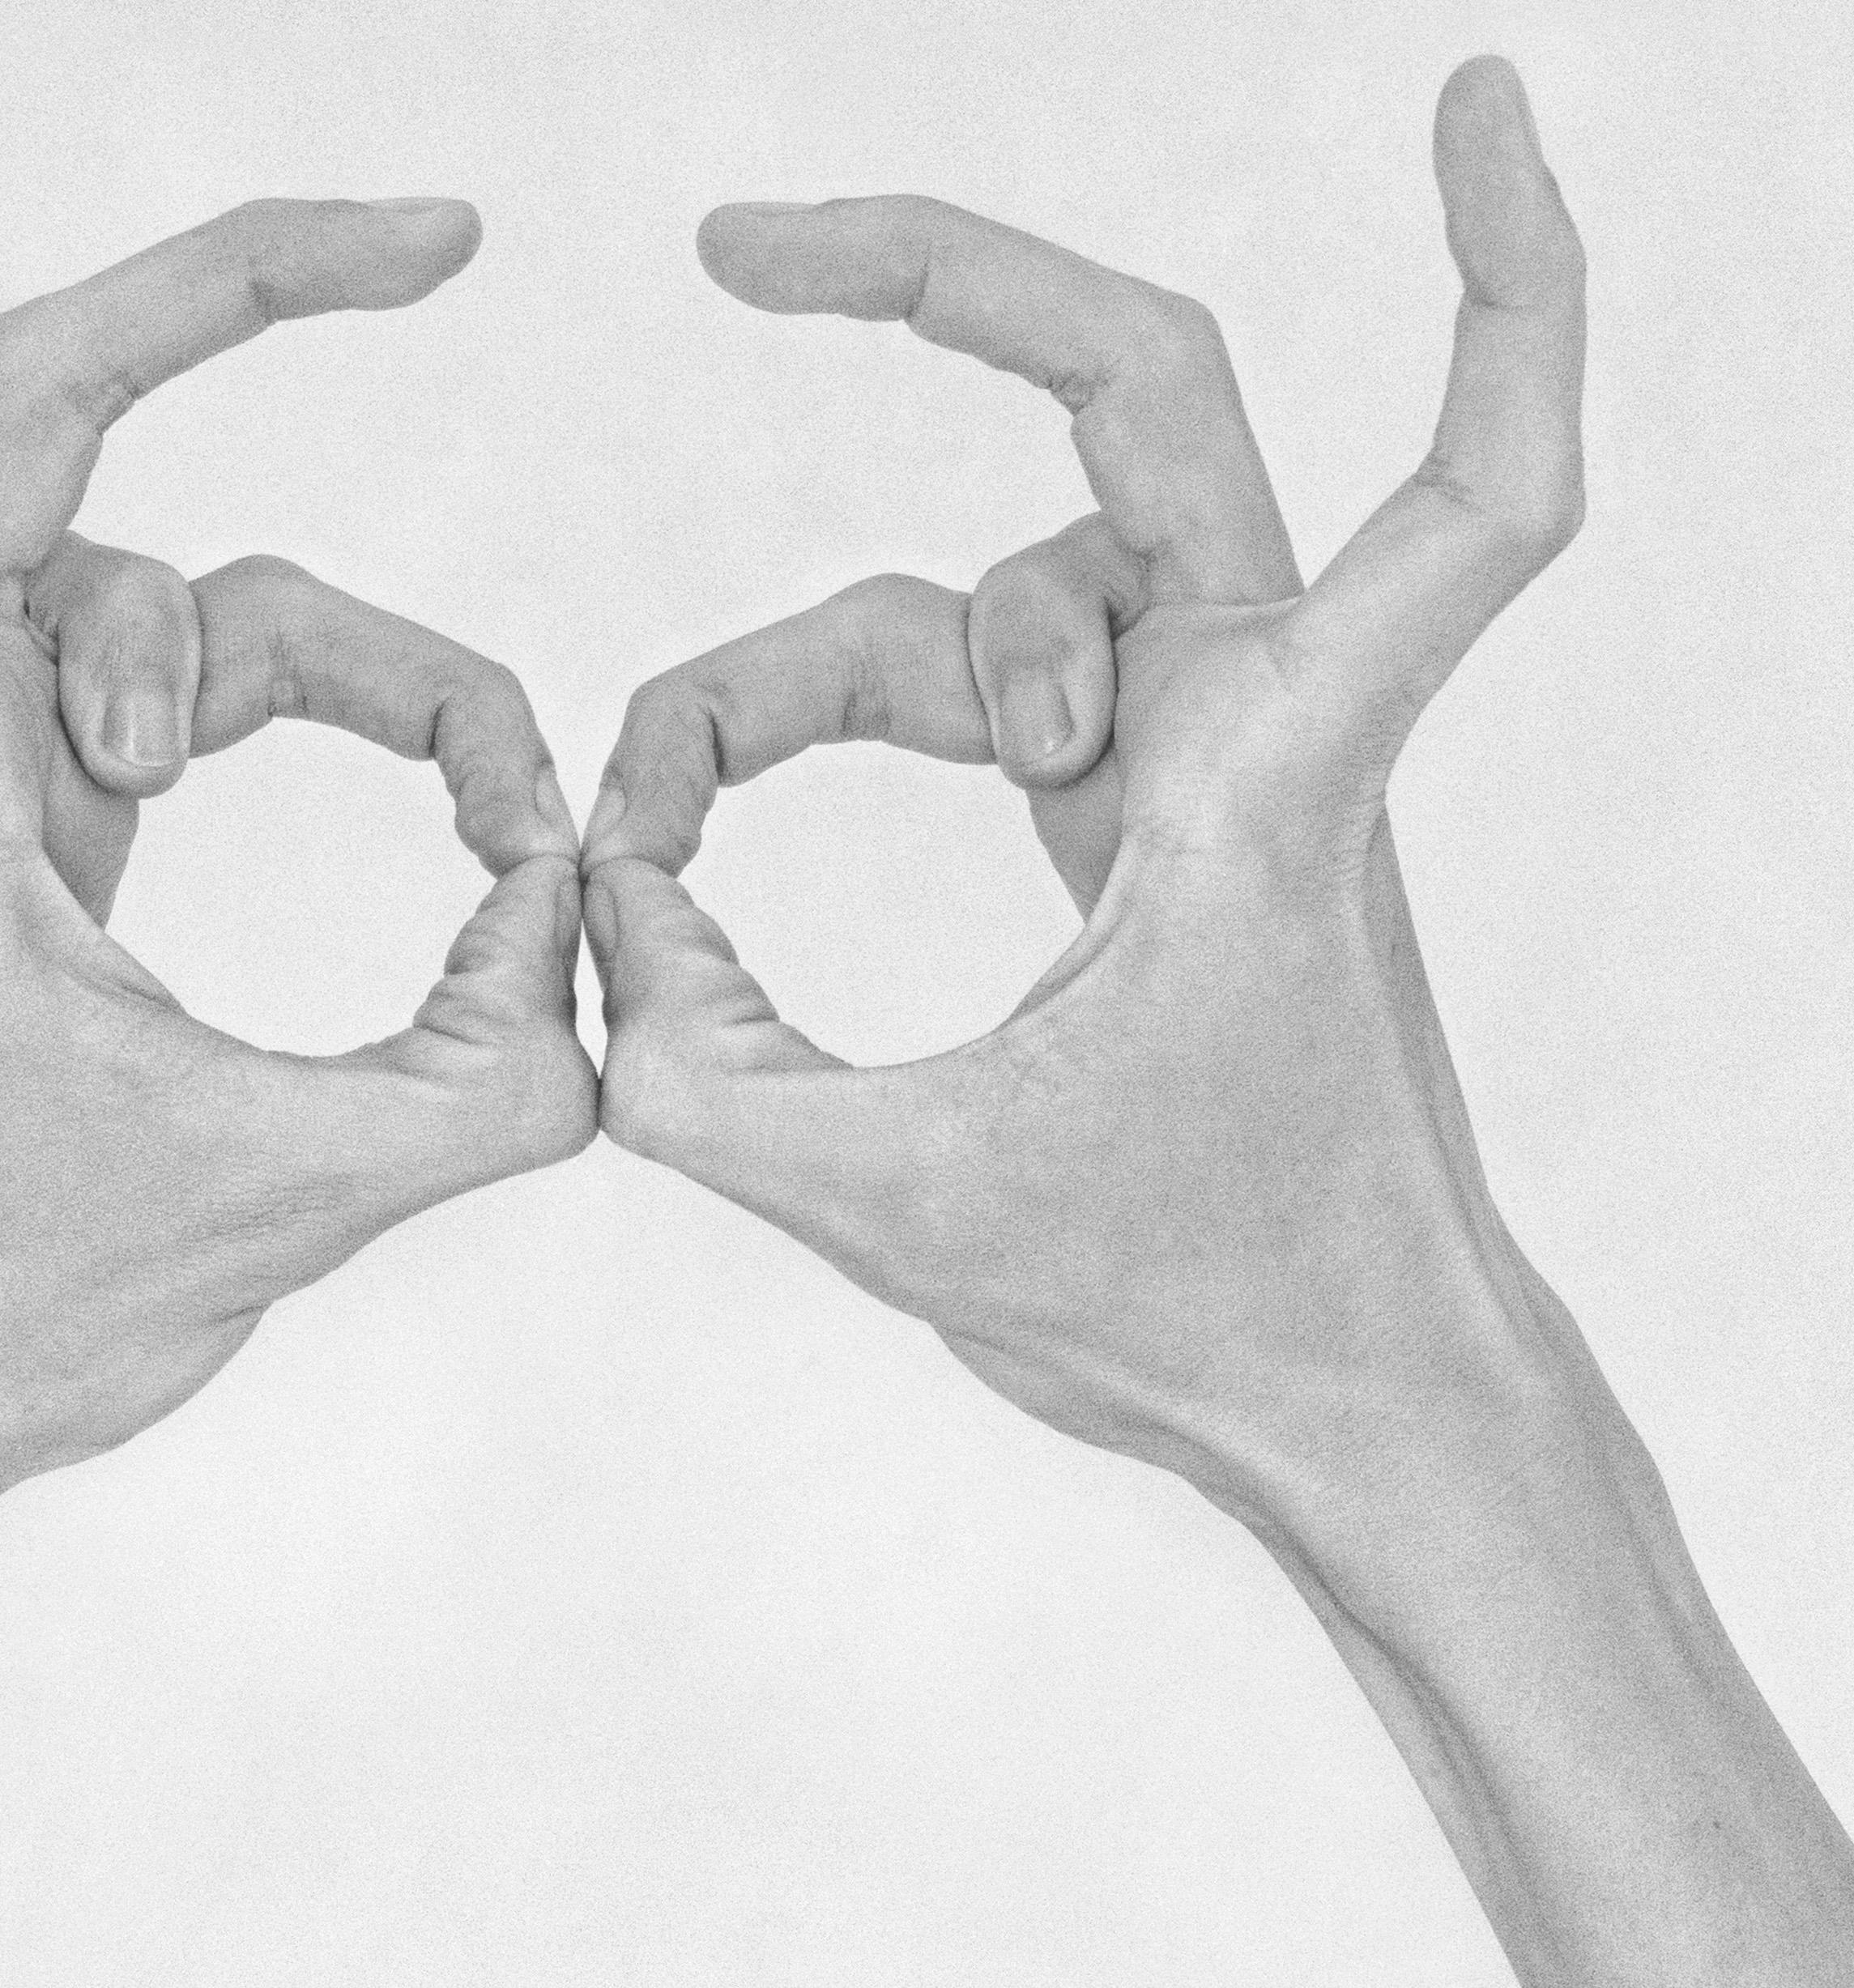 Untitled XX. From the Series Chiromorphose. Hands. Black & White Photography For Sale 1